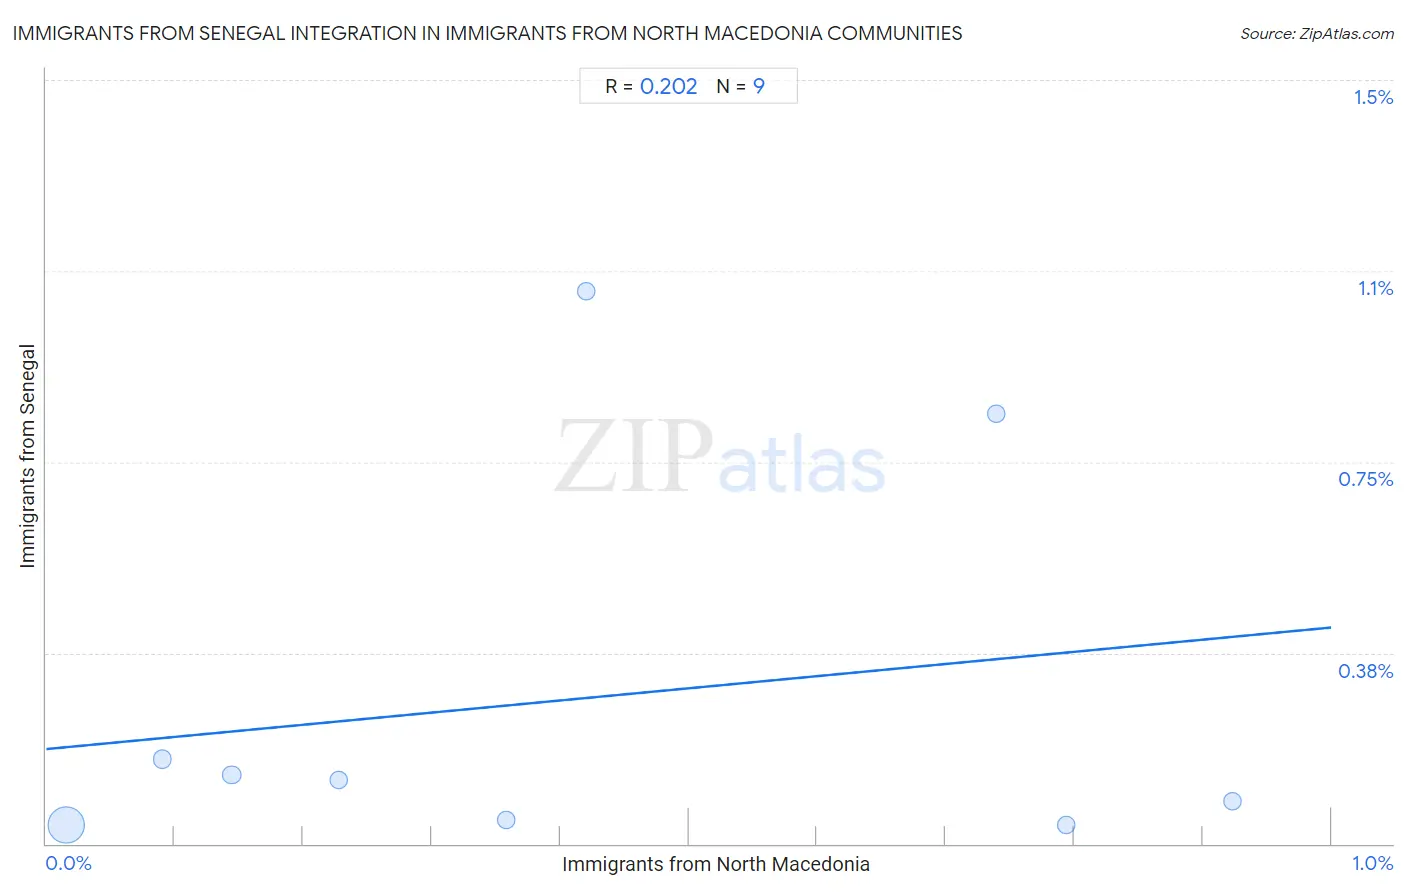 Immigrants from North Macedonia Integration in Immigrants from Senegal Communities